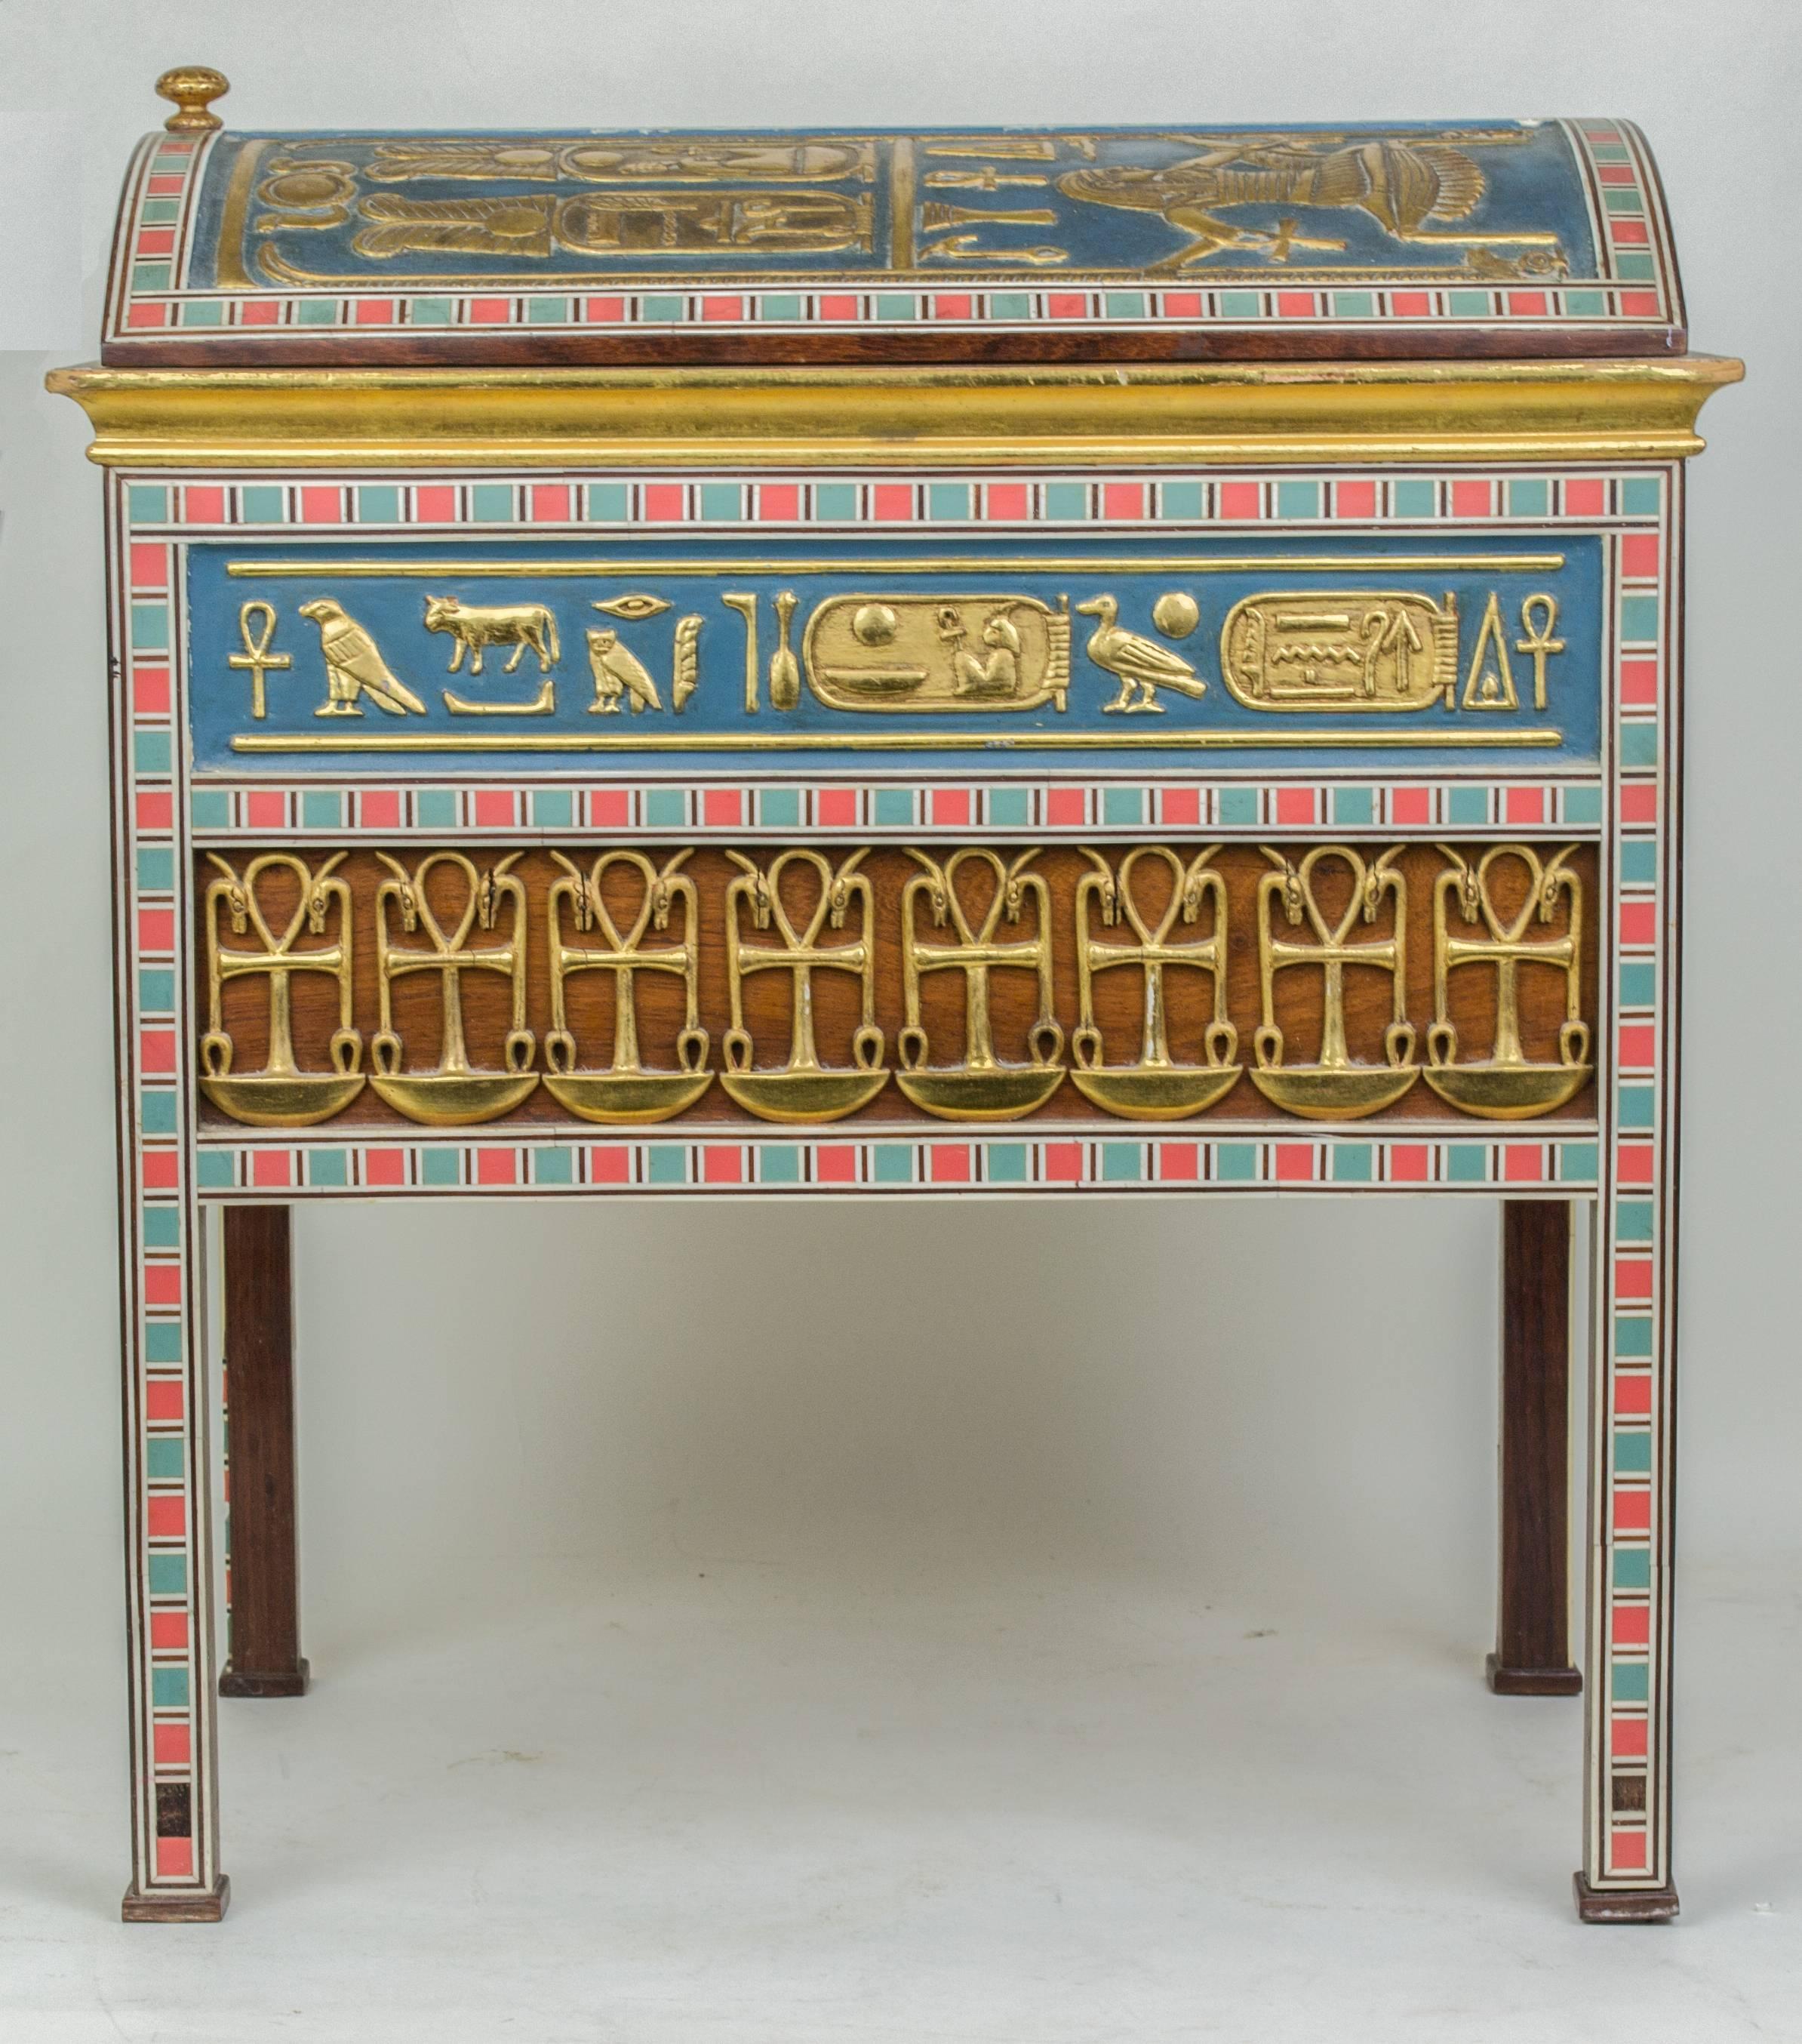 An unusual Egyptian Revival footed jewelry box.
Stock number: DA60.